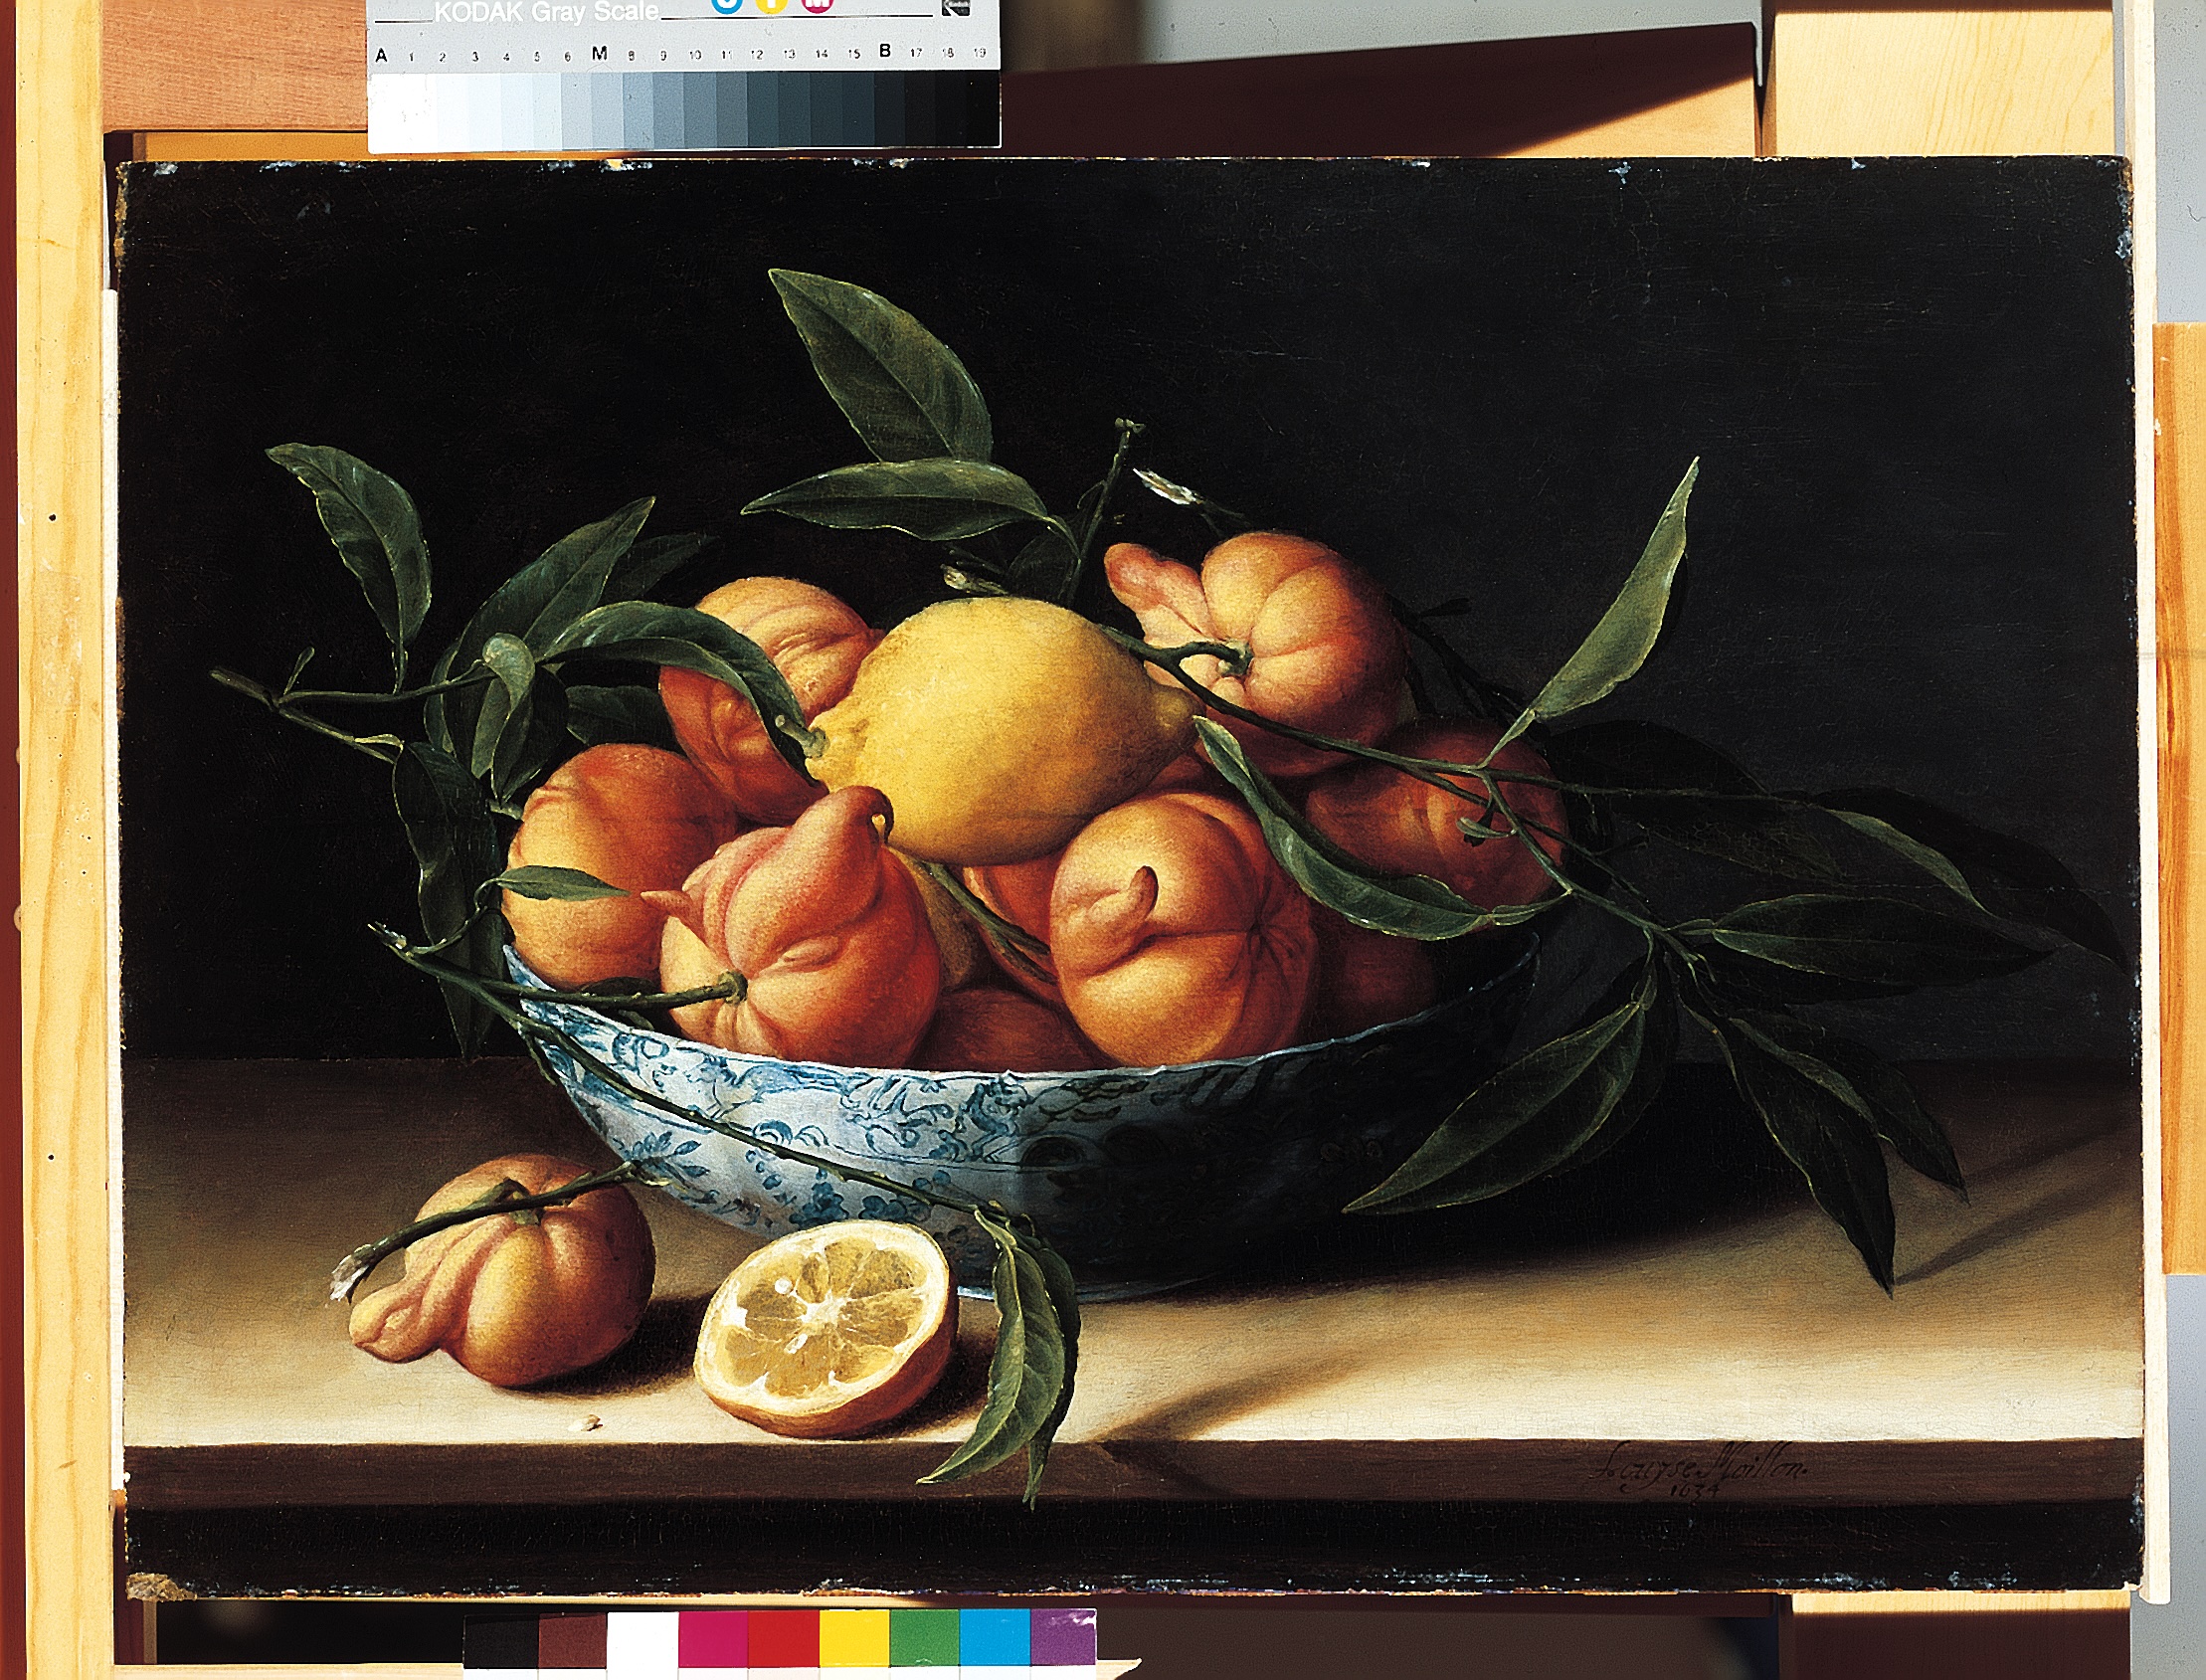 A still-life painting of a bowl of oranges on a table. The bowl is blue and white porcelain, with an intricate design, but the table is quite simple and the background is black. The oranges are arranged with stems and leaves and a single lemon in the center. One half of a cut orange rests on the table. The oranges are misshapen by our modern standards, and do not appear perfectly round.